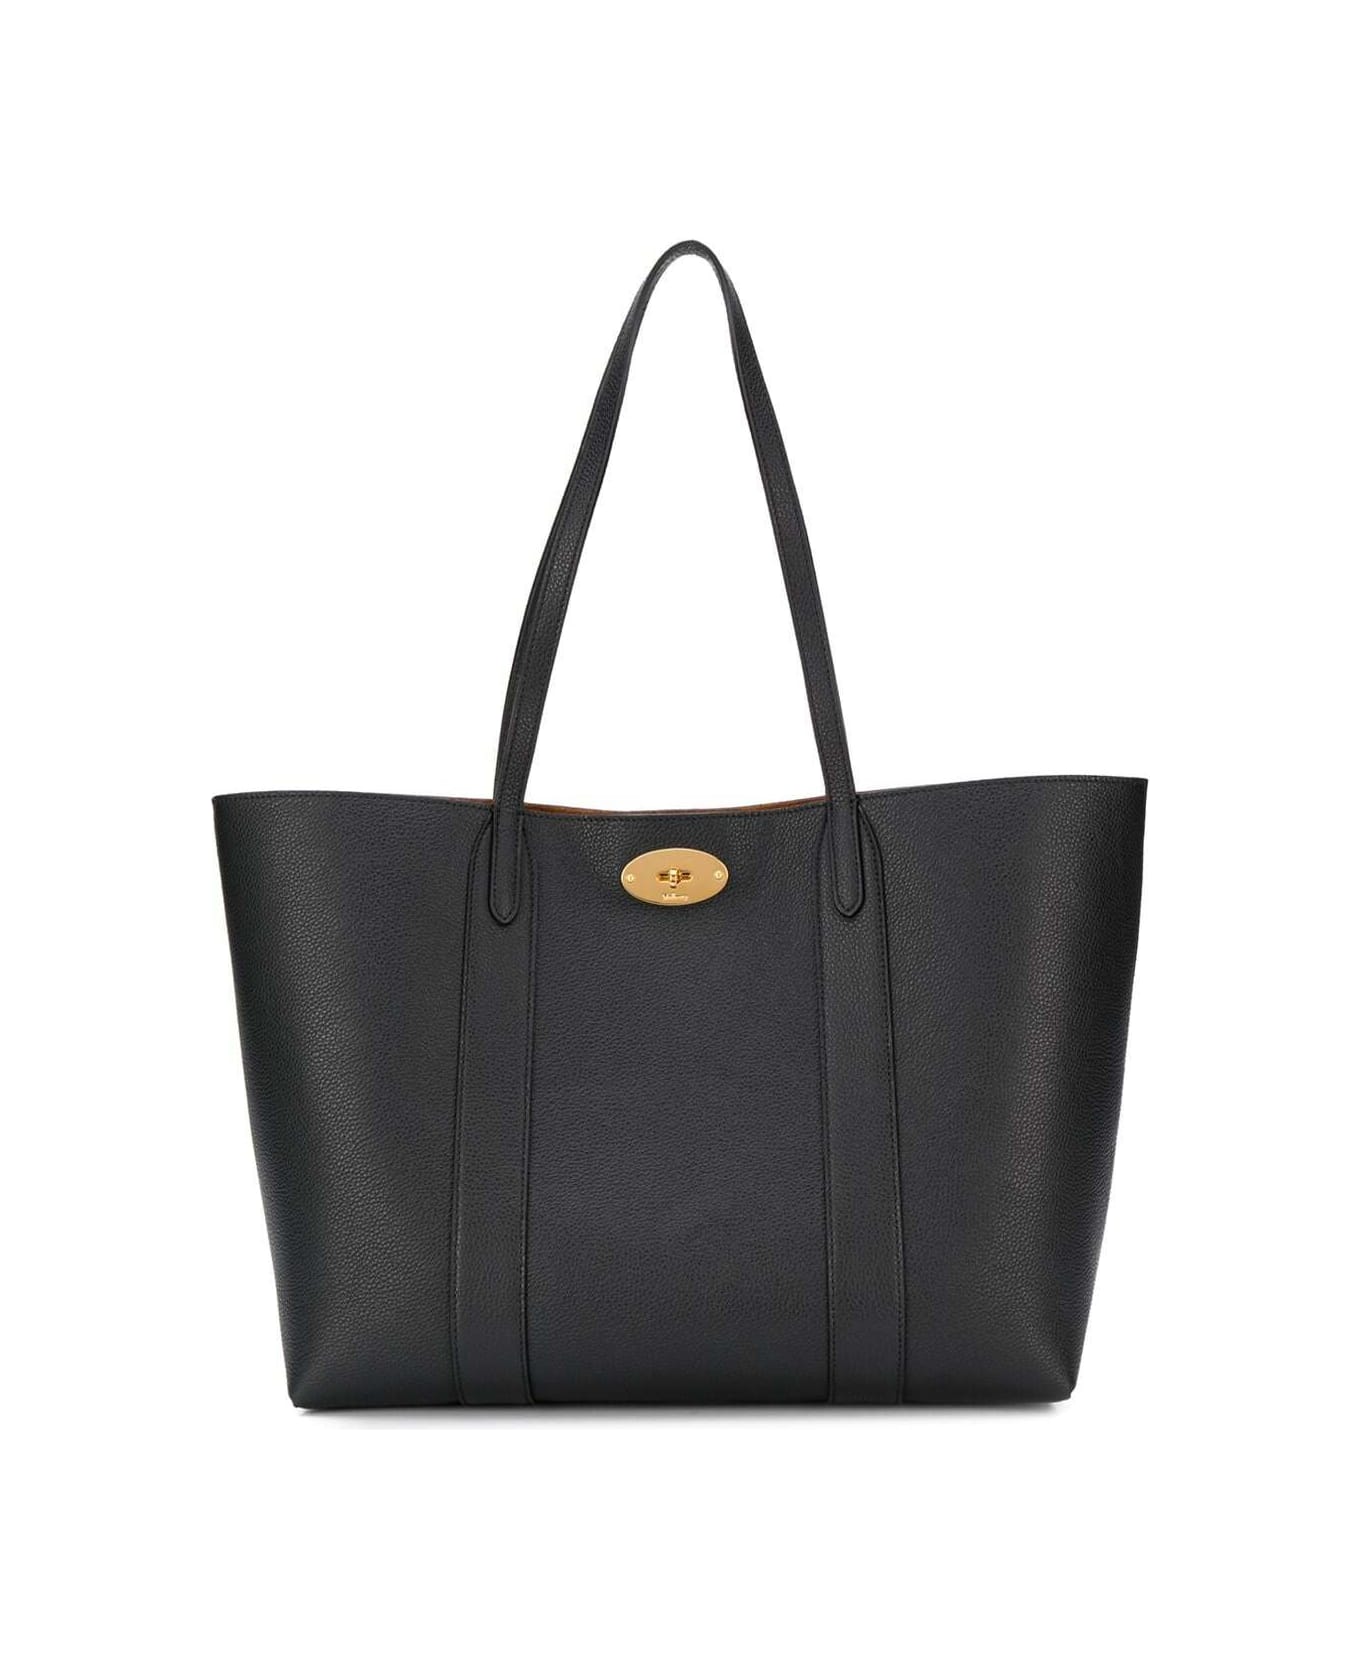 Mulberry Small Tote Black Leather Shopper Bag Mulberry Woman - Black トートバッグ